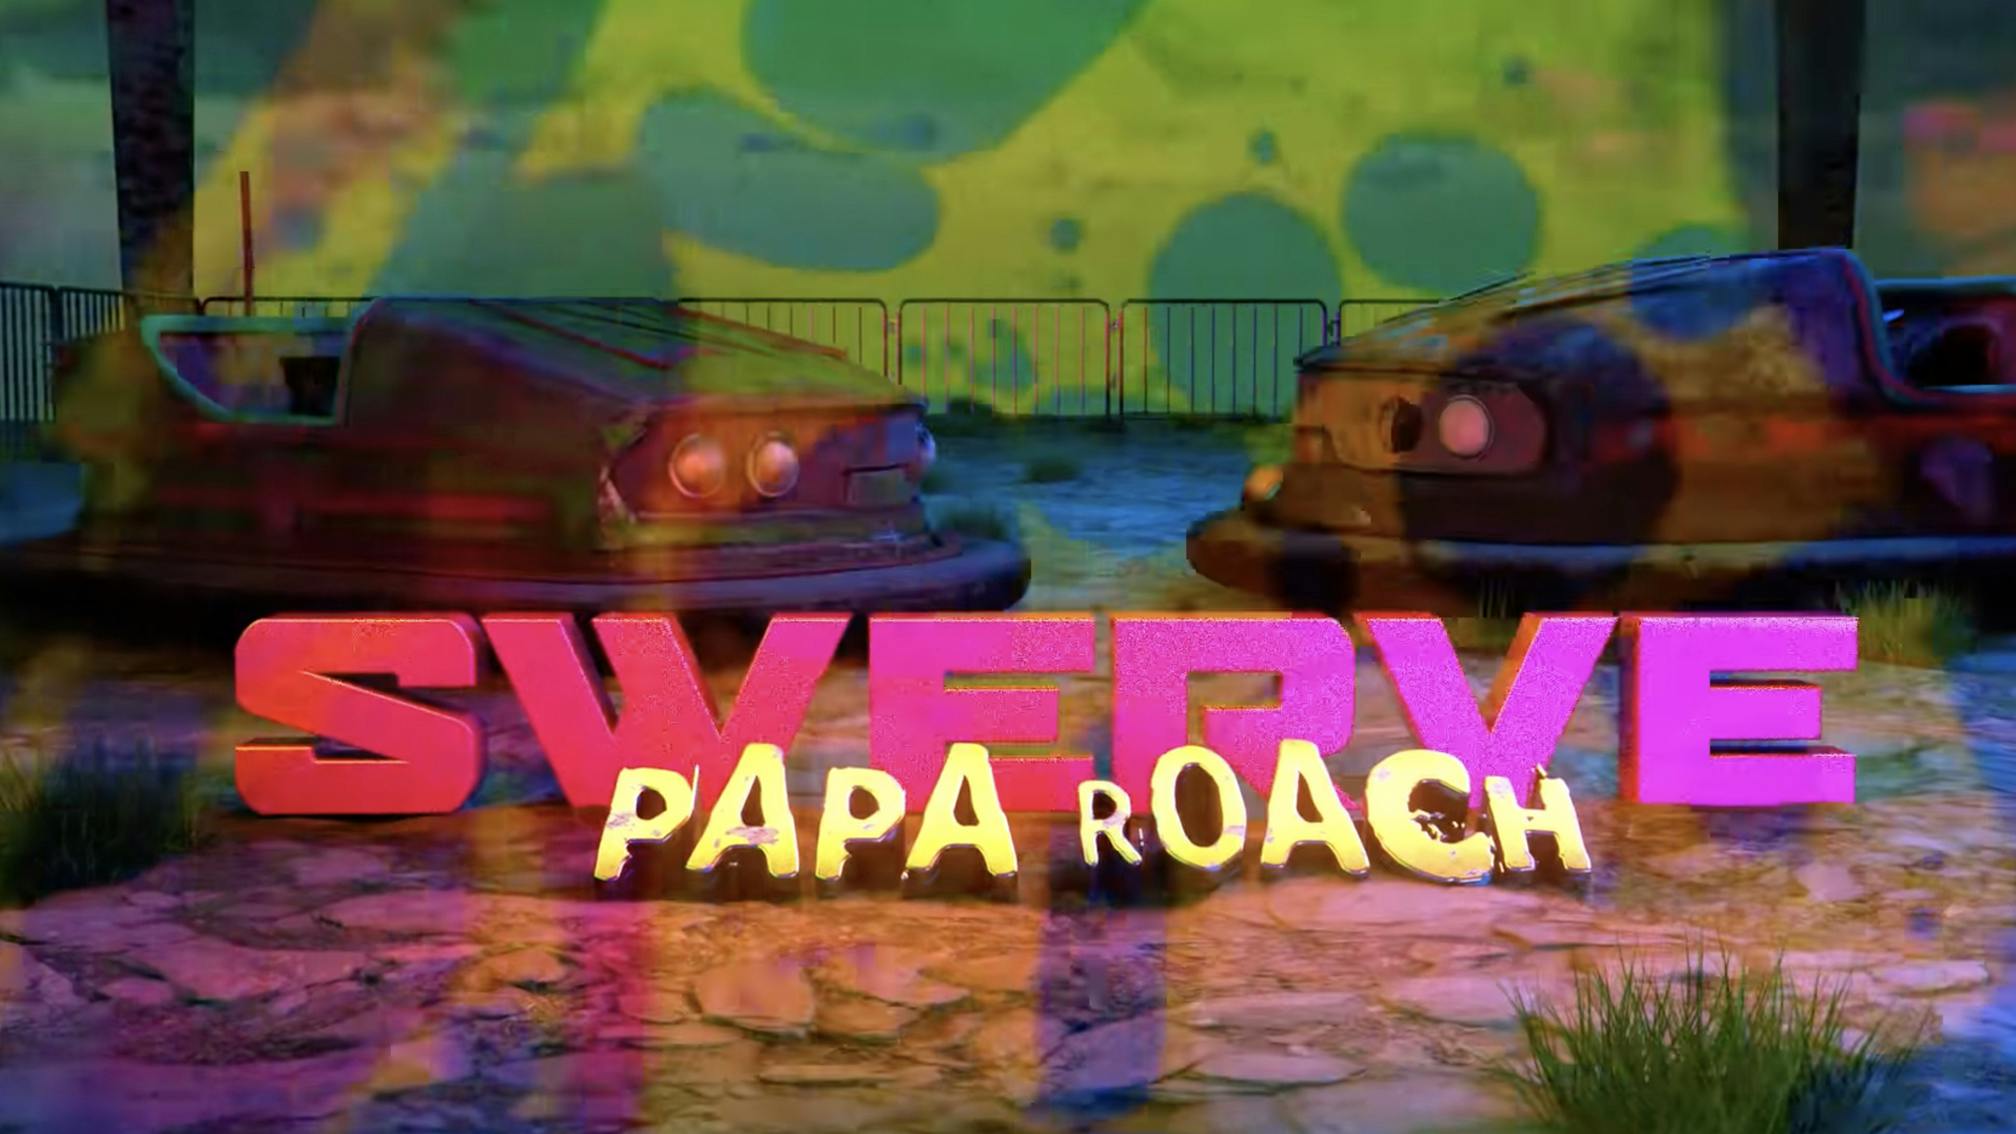 Papa Roach drop experimental new single Swerve, feat. FEVER 333 and rapper Sueco